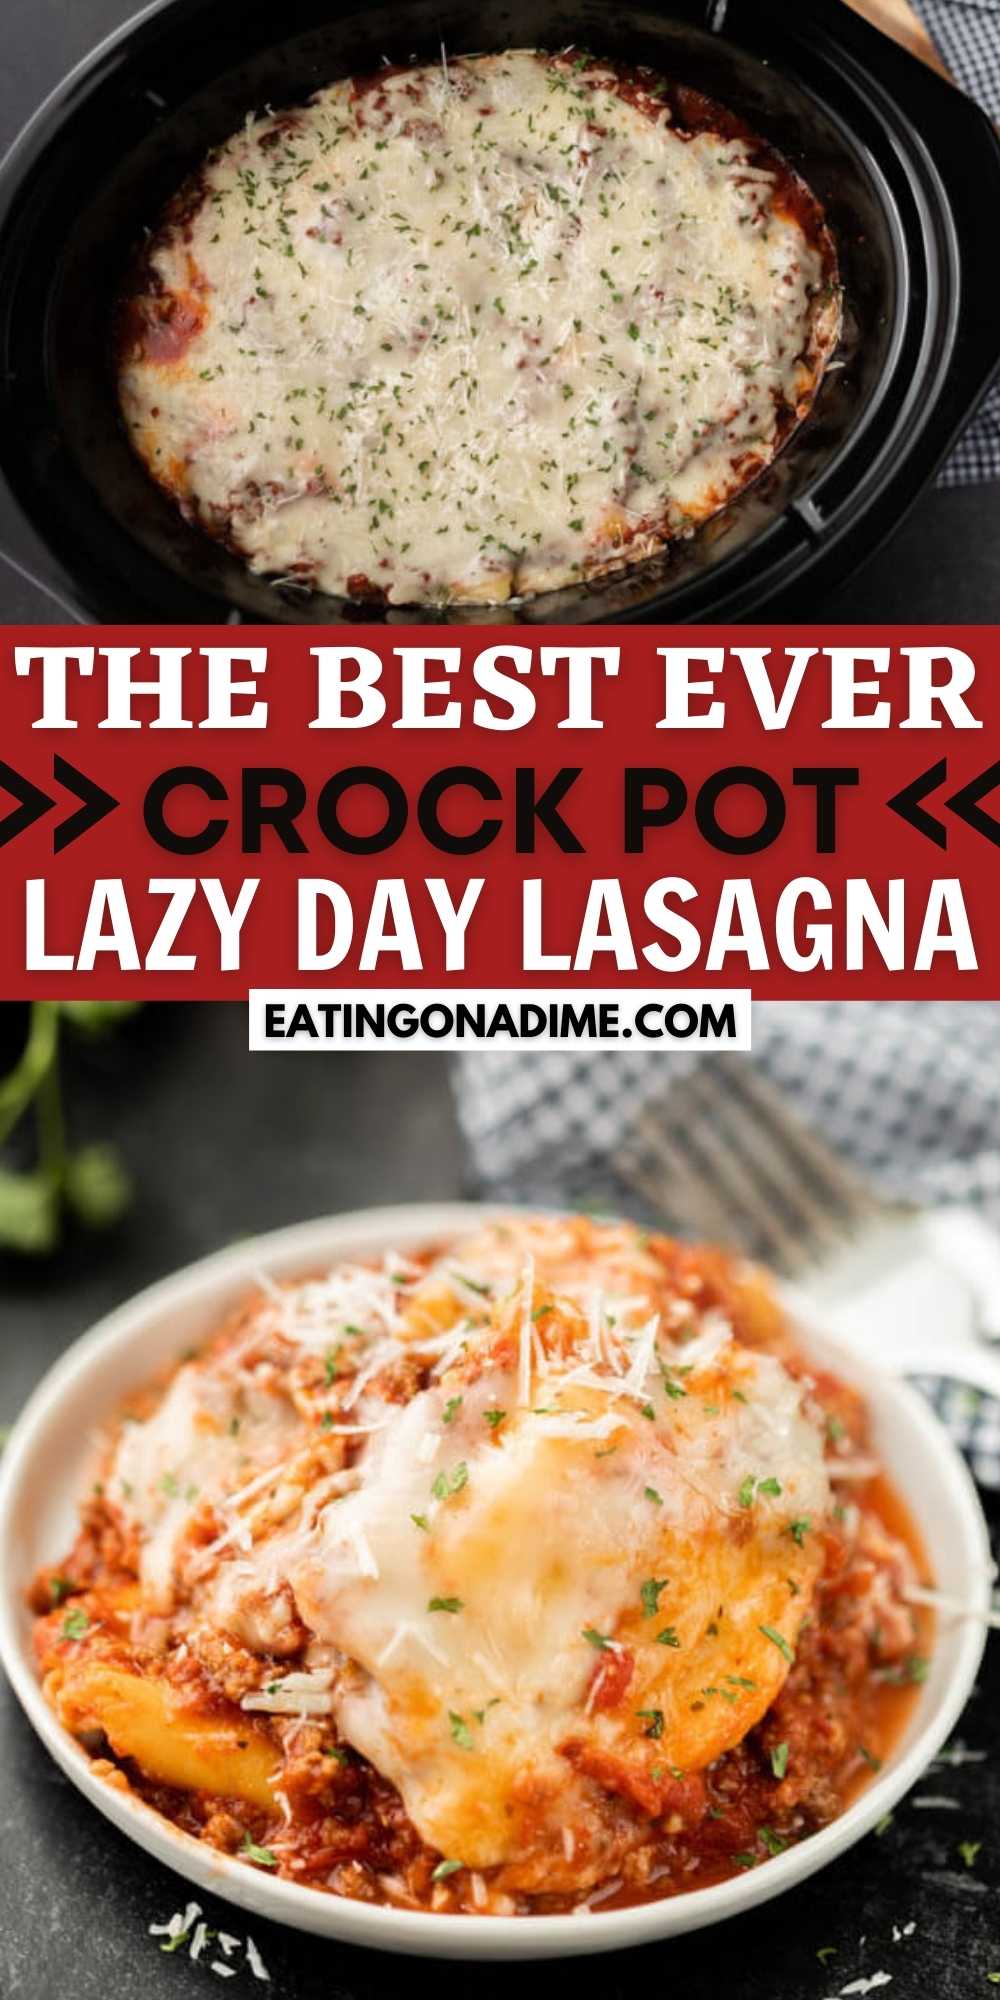 This is our lazy day crock pot lasagna recipe. You are going to love this fun twist on a traditional lasagna with this easy crock pot lasagna recipe with ravioli. This slow cooker lazy day lasagna recipe that is simple to make! #eatingonadime #lazydaylasagna #crockpot #crockpotrecipes #lasagna 
